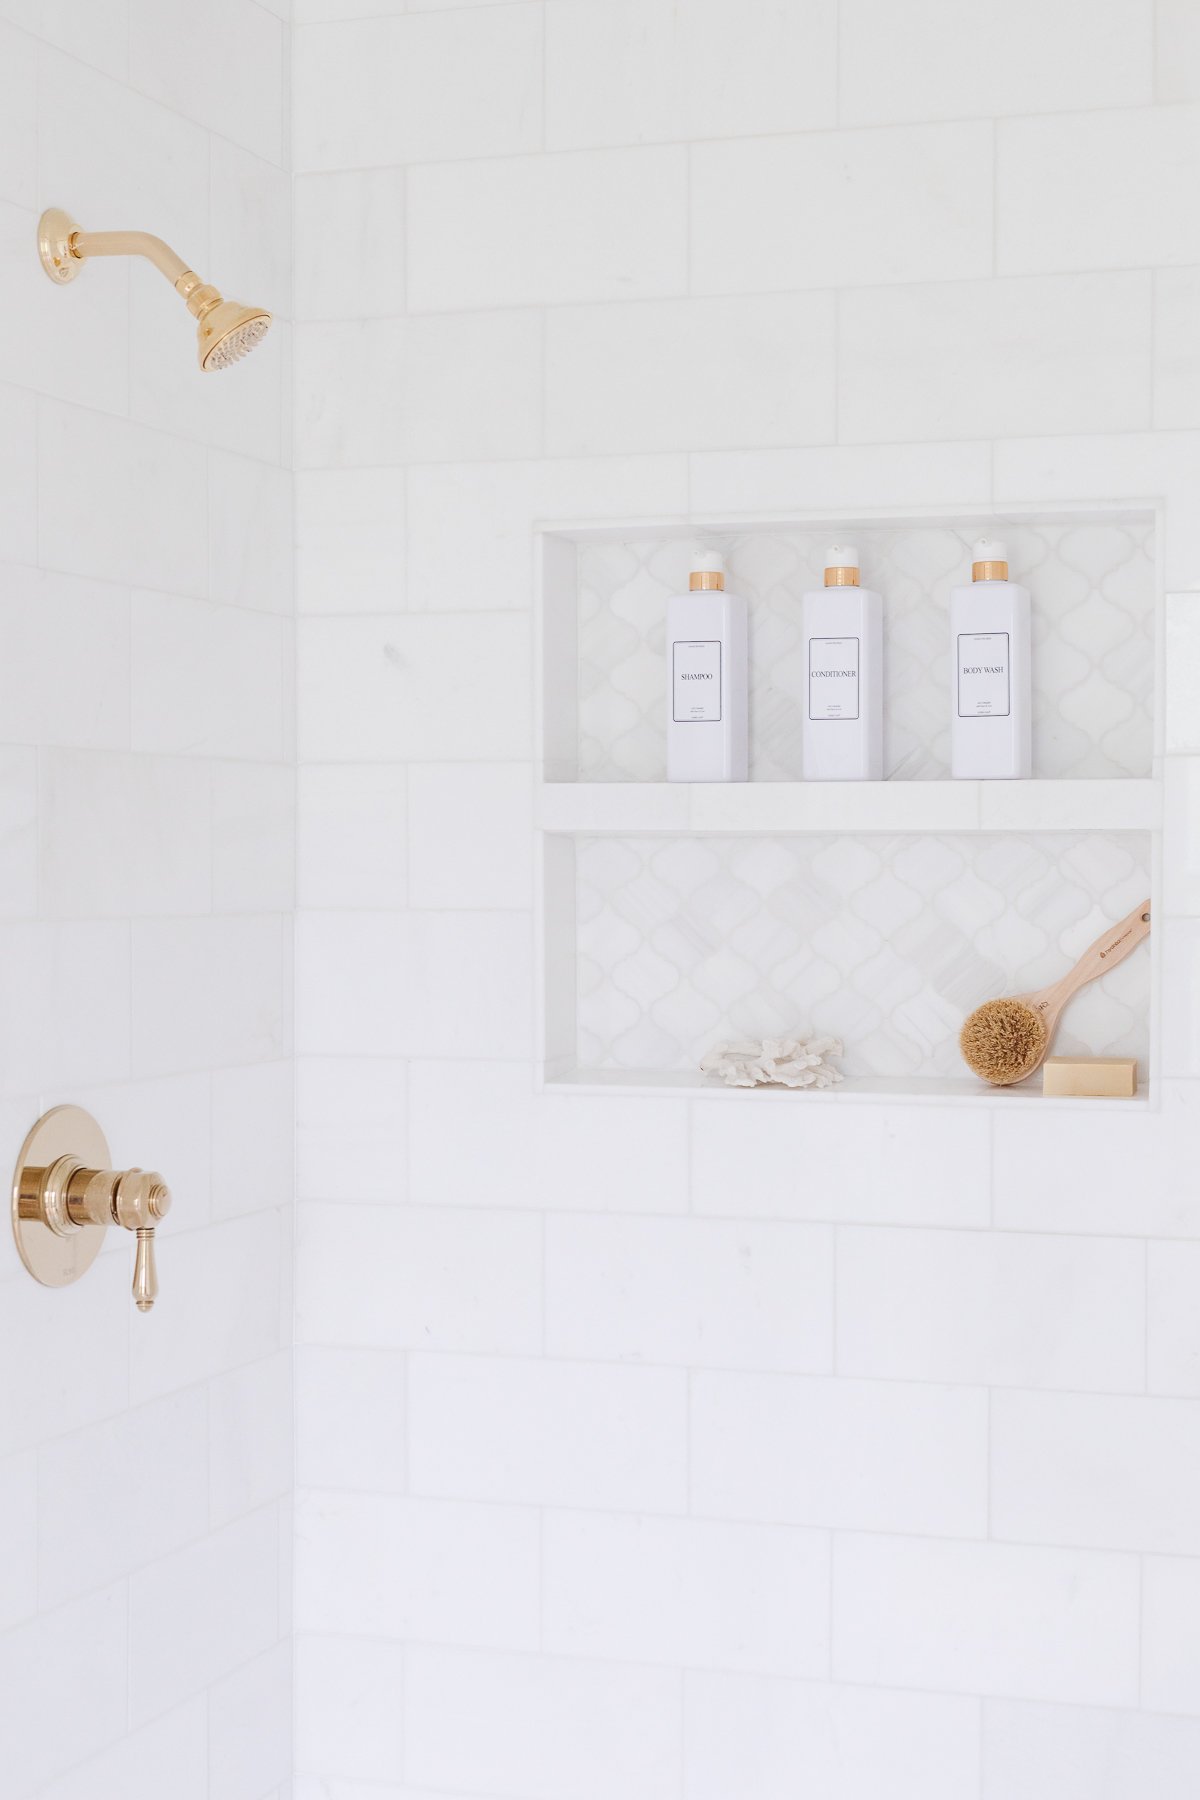 A white tiled shower with a gold shower head.